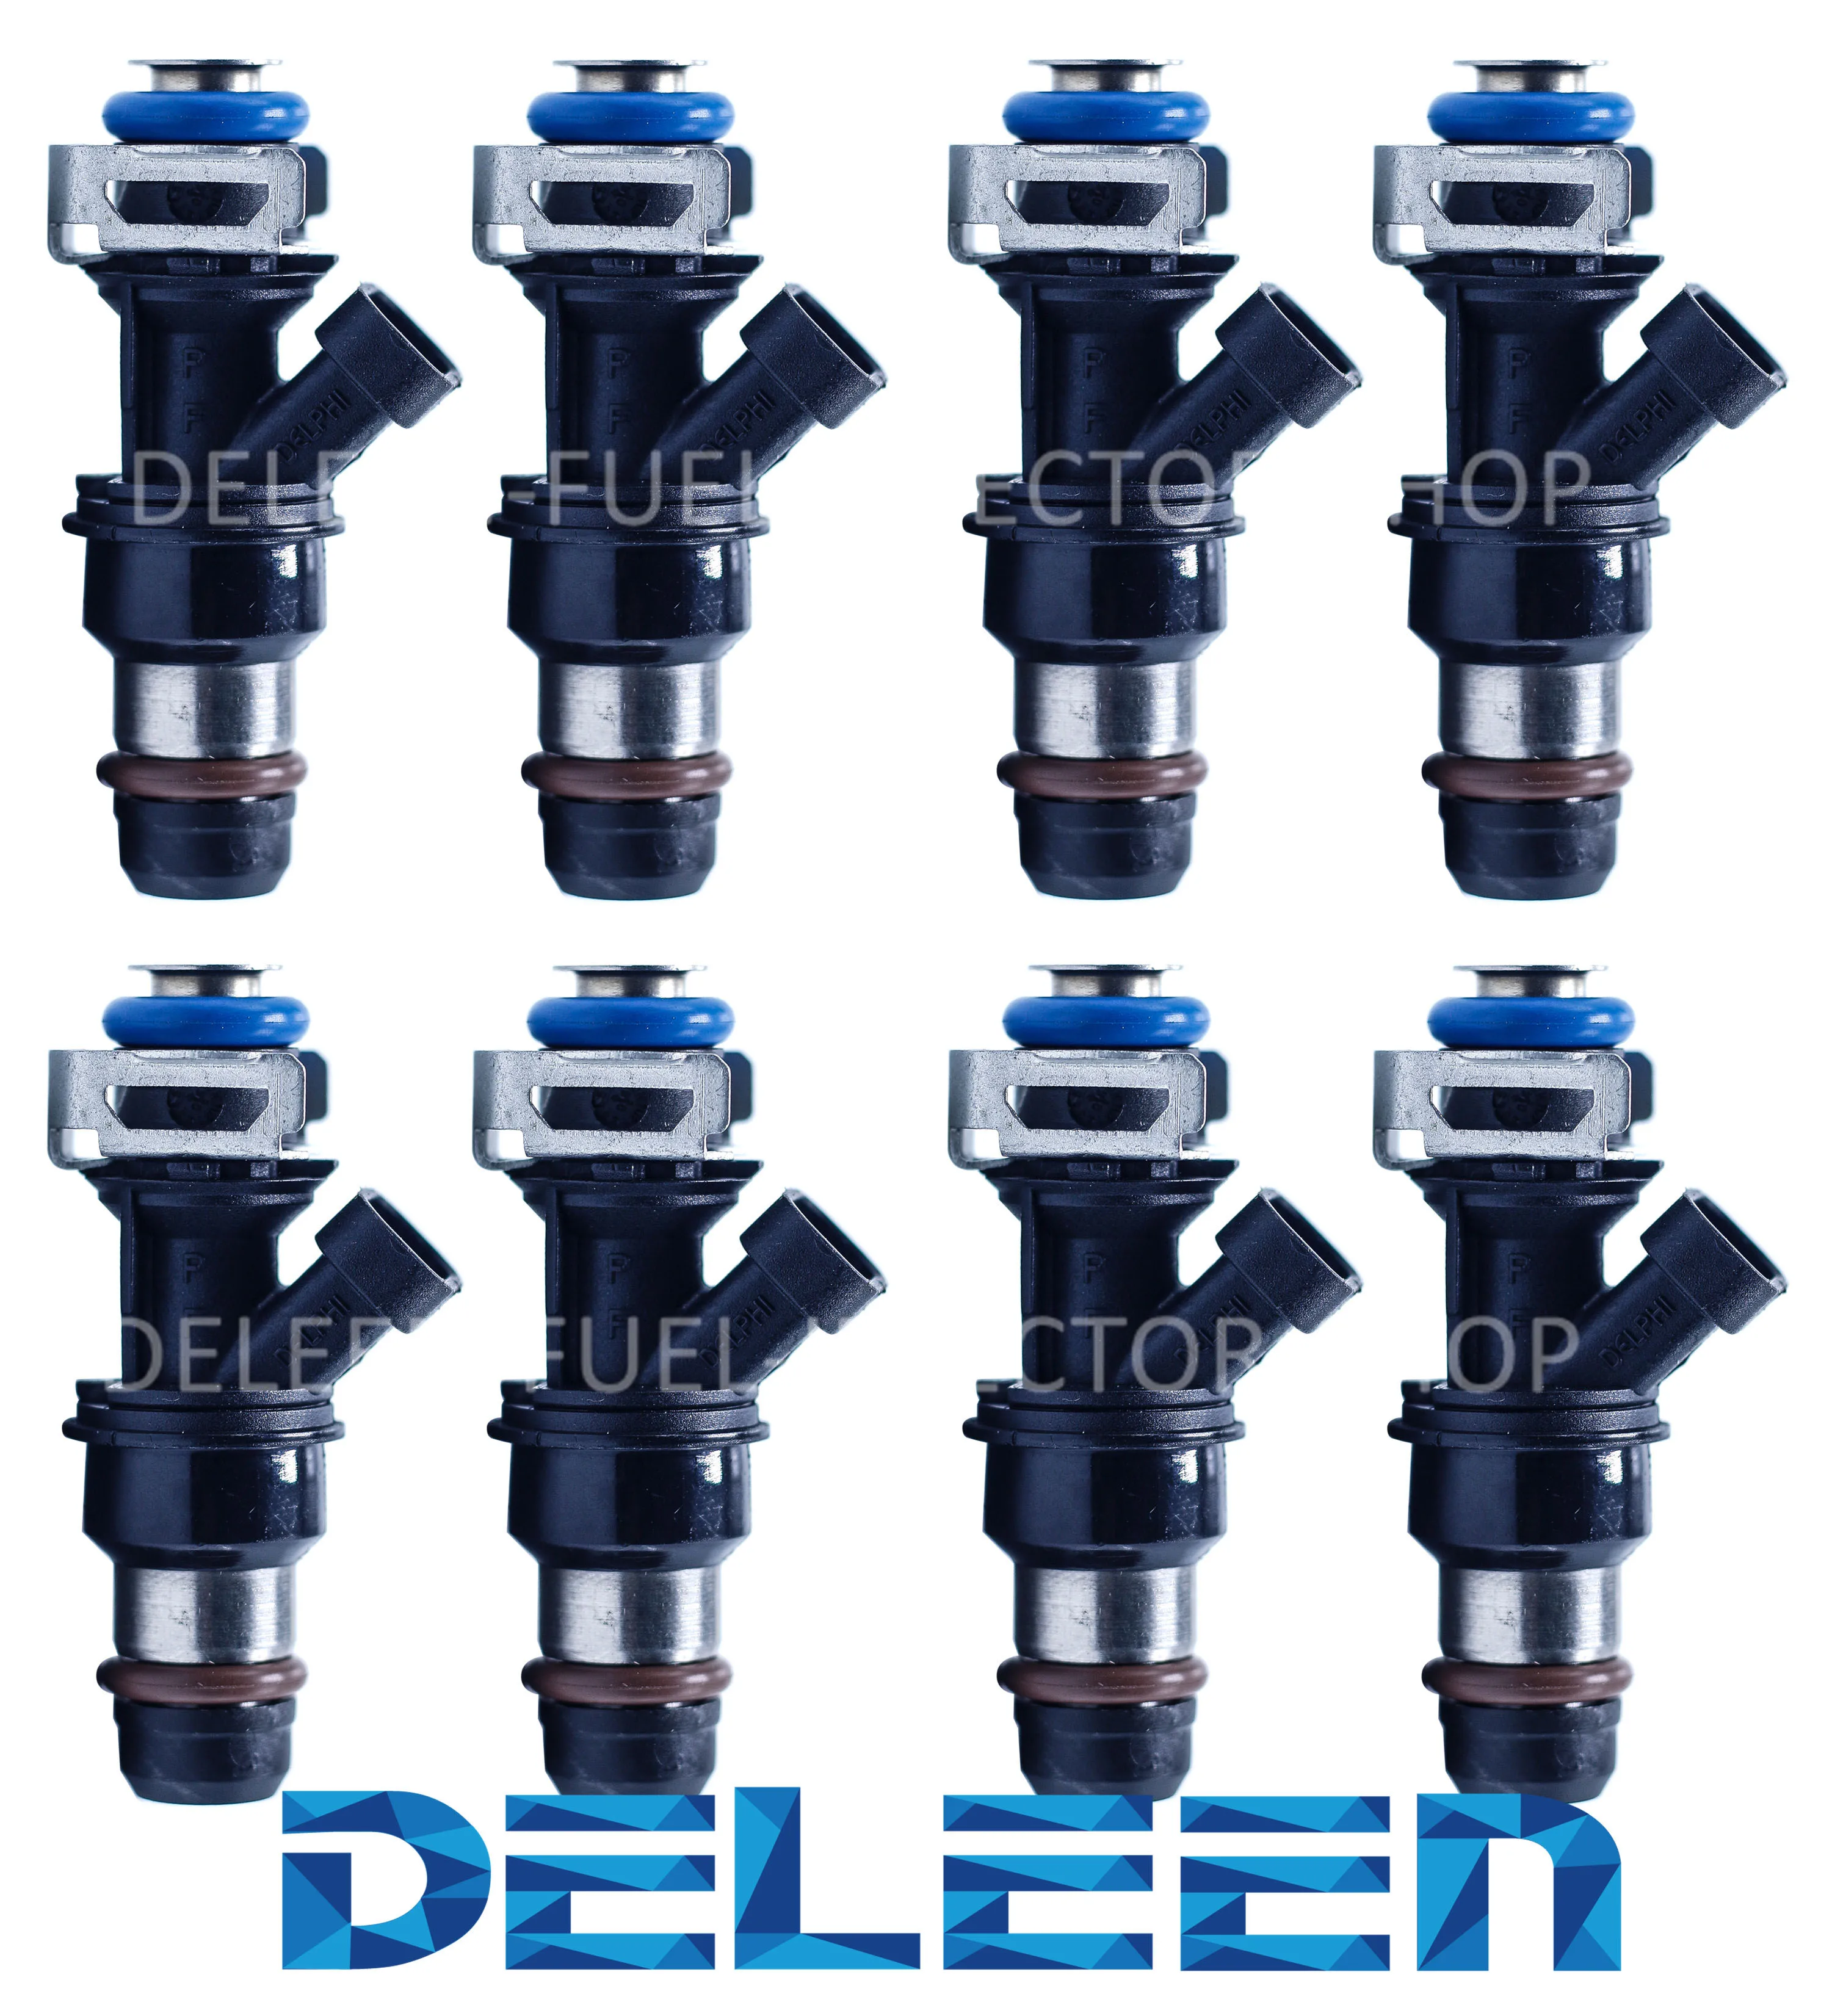 

Deleen 4x High impedance Fuel Injector 1999-2004 C hevrolet Silverado 2500 6.0L For C hevrolet Car Accessories